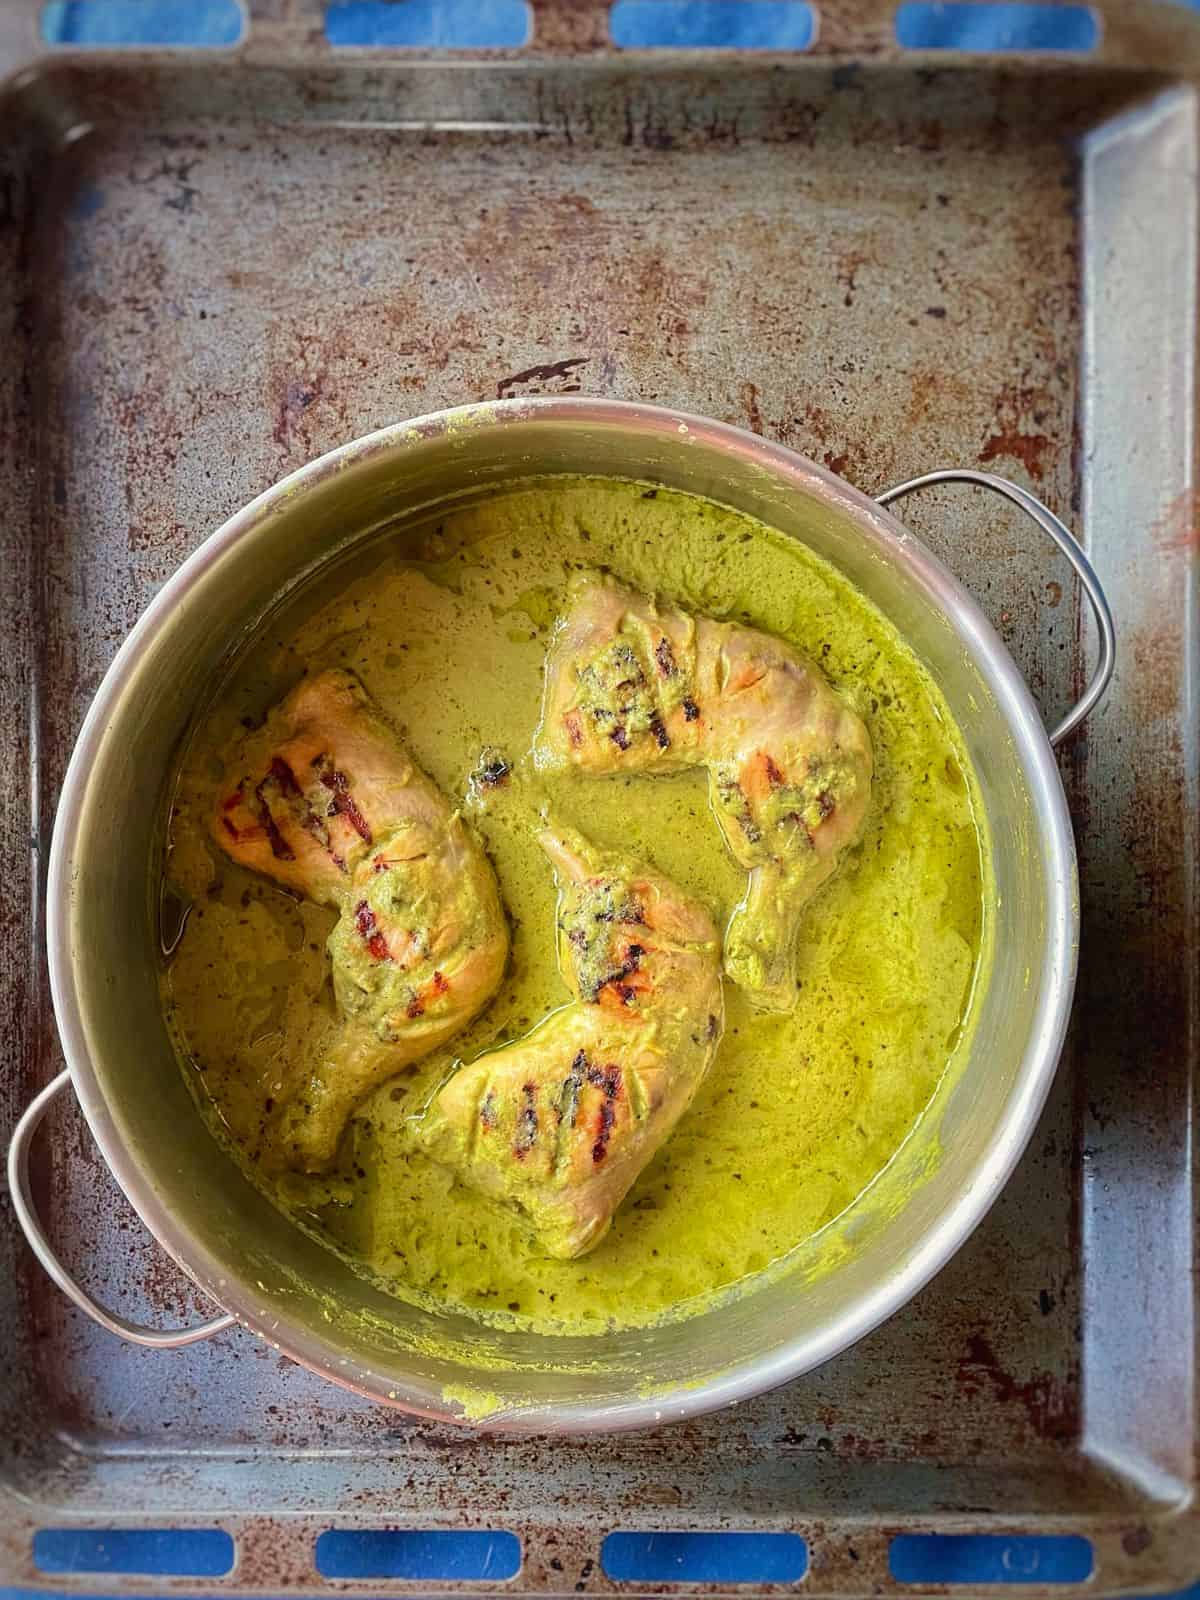 A pot of green coloured curry with chicken leg quarters